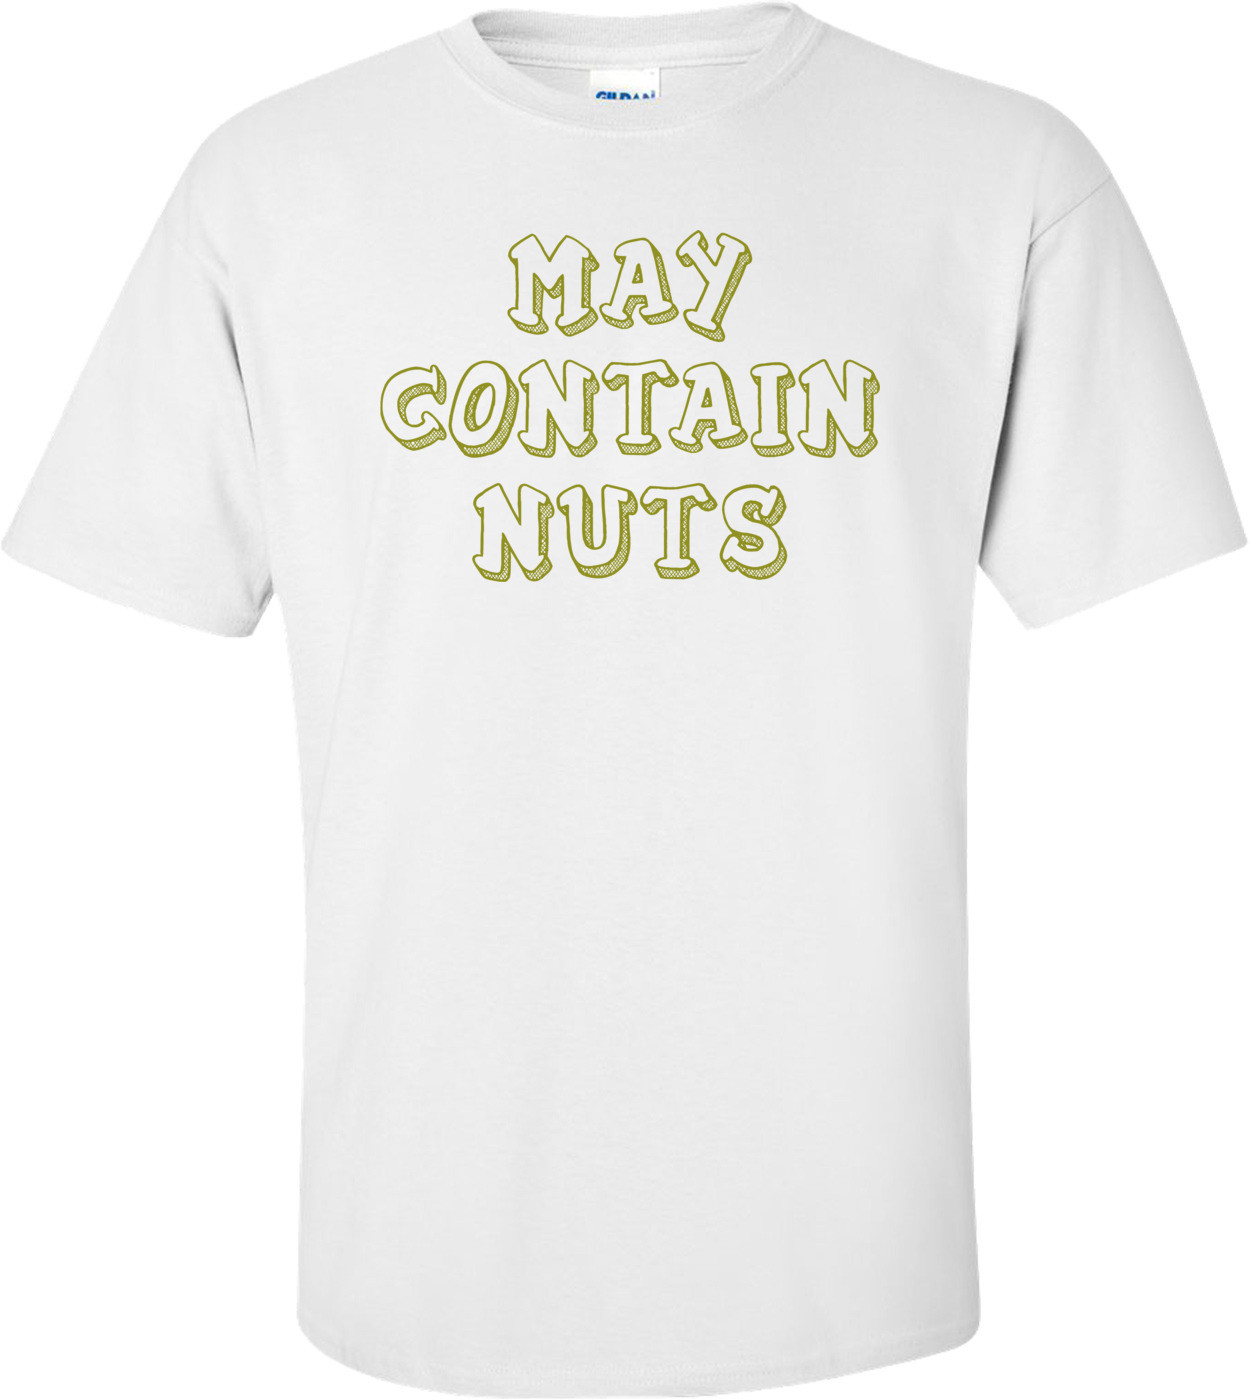 MAY CONTAIN NUTS